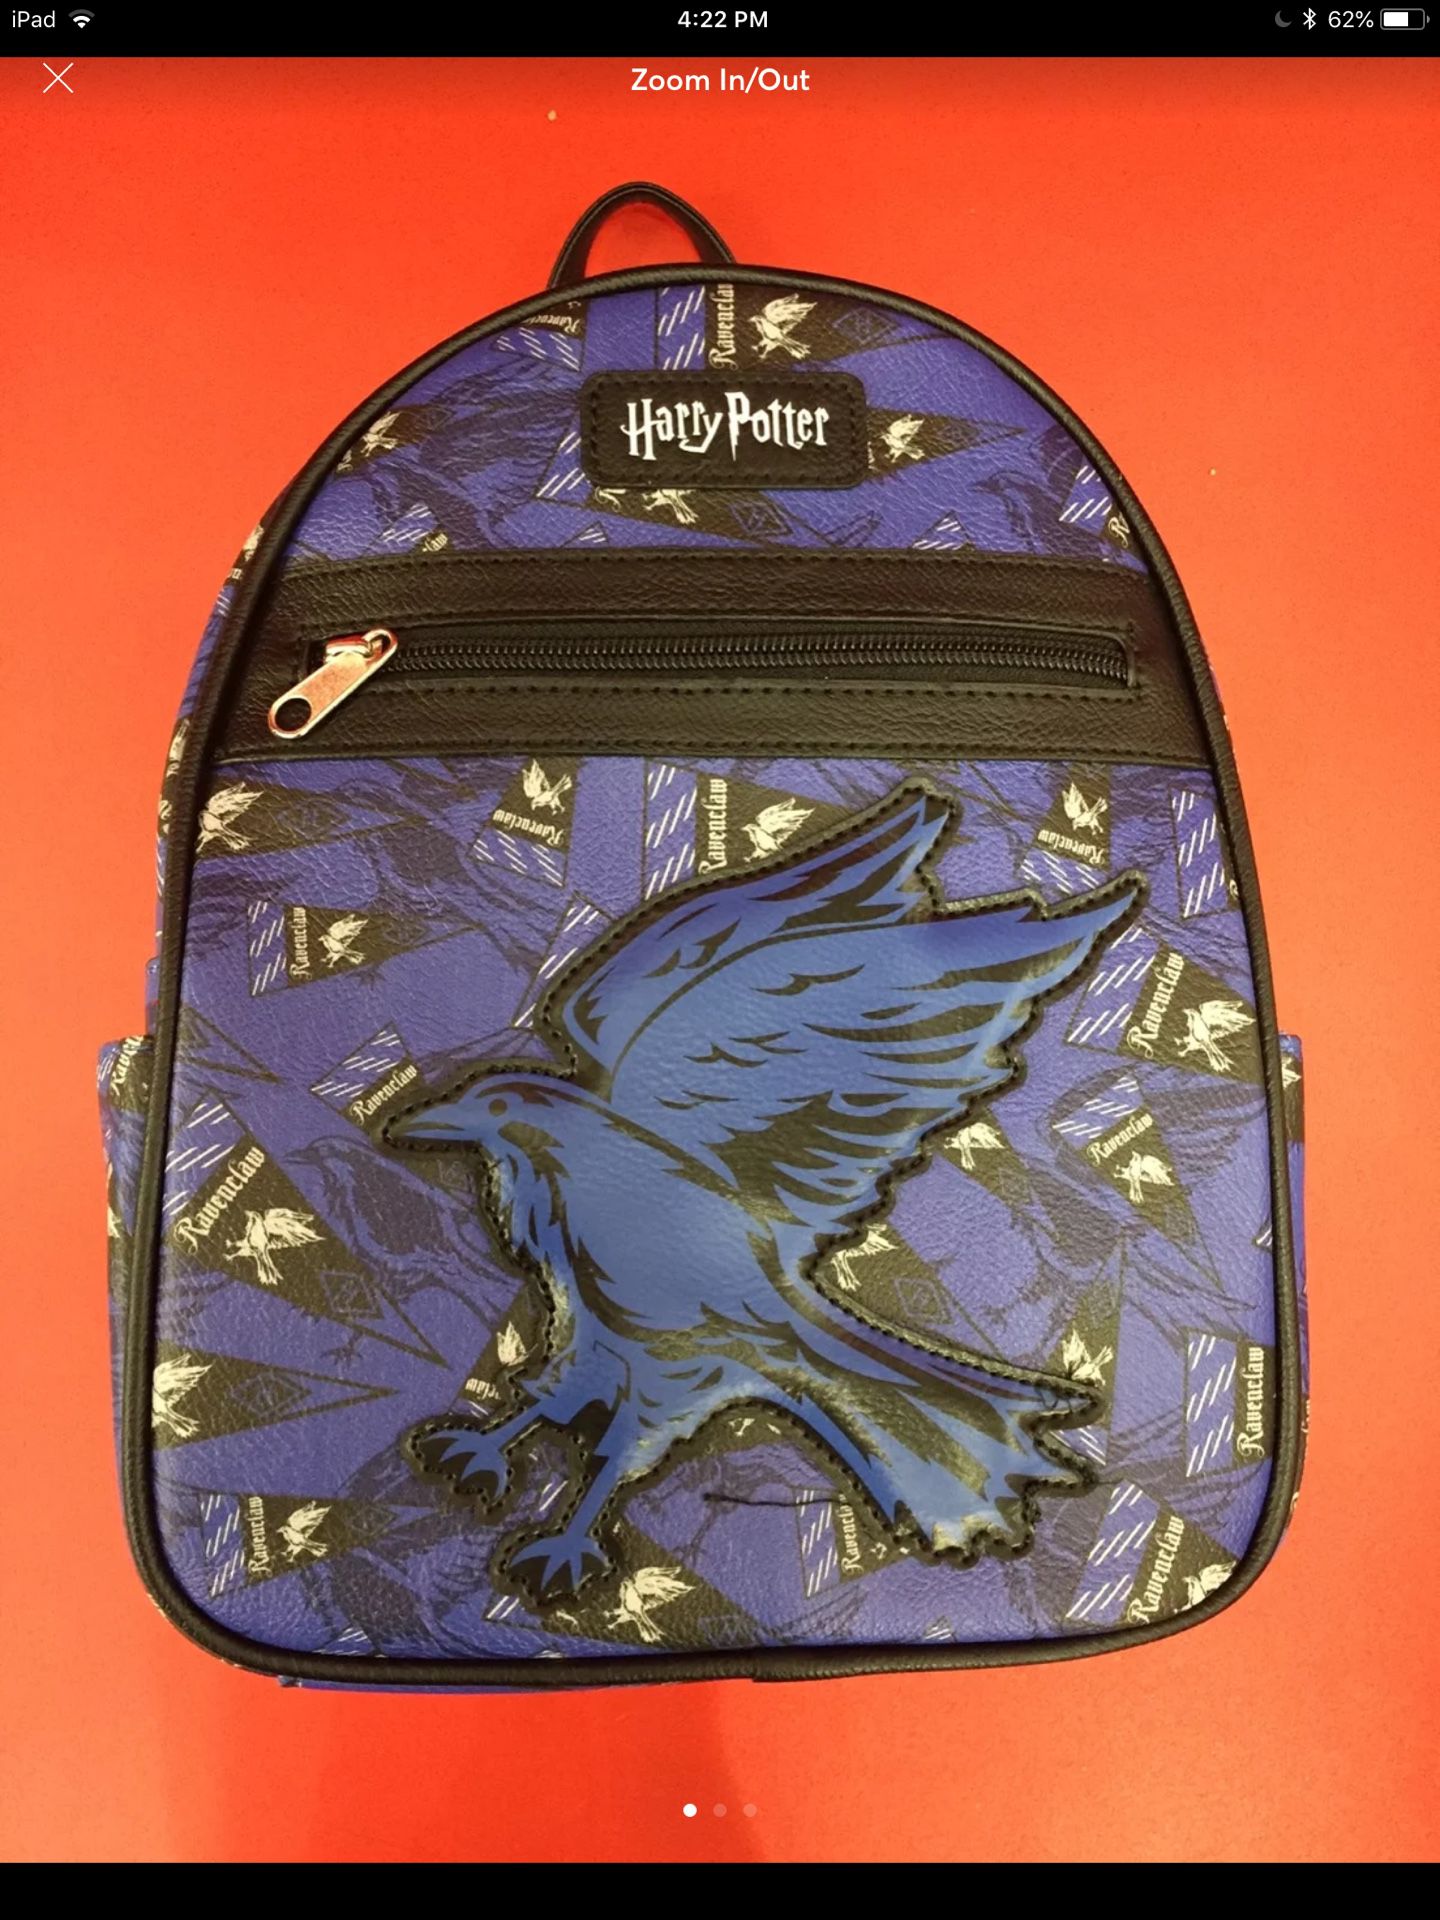 New Harry Potter Ravenclaw Mini Backpack by Loungefly for WarnerBros.vhtf